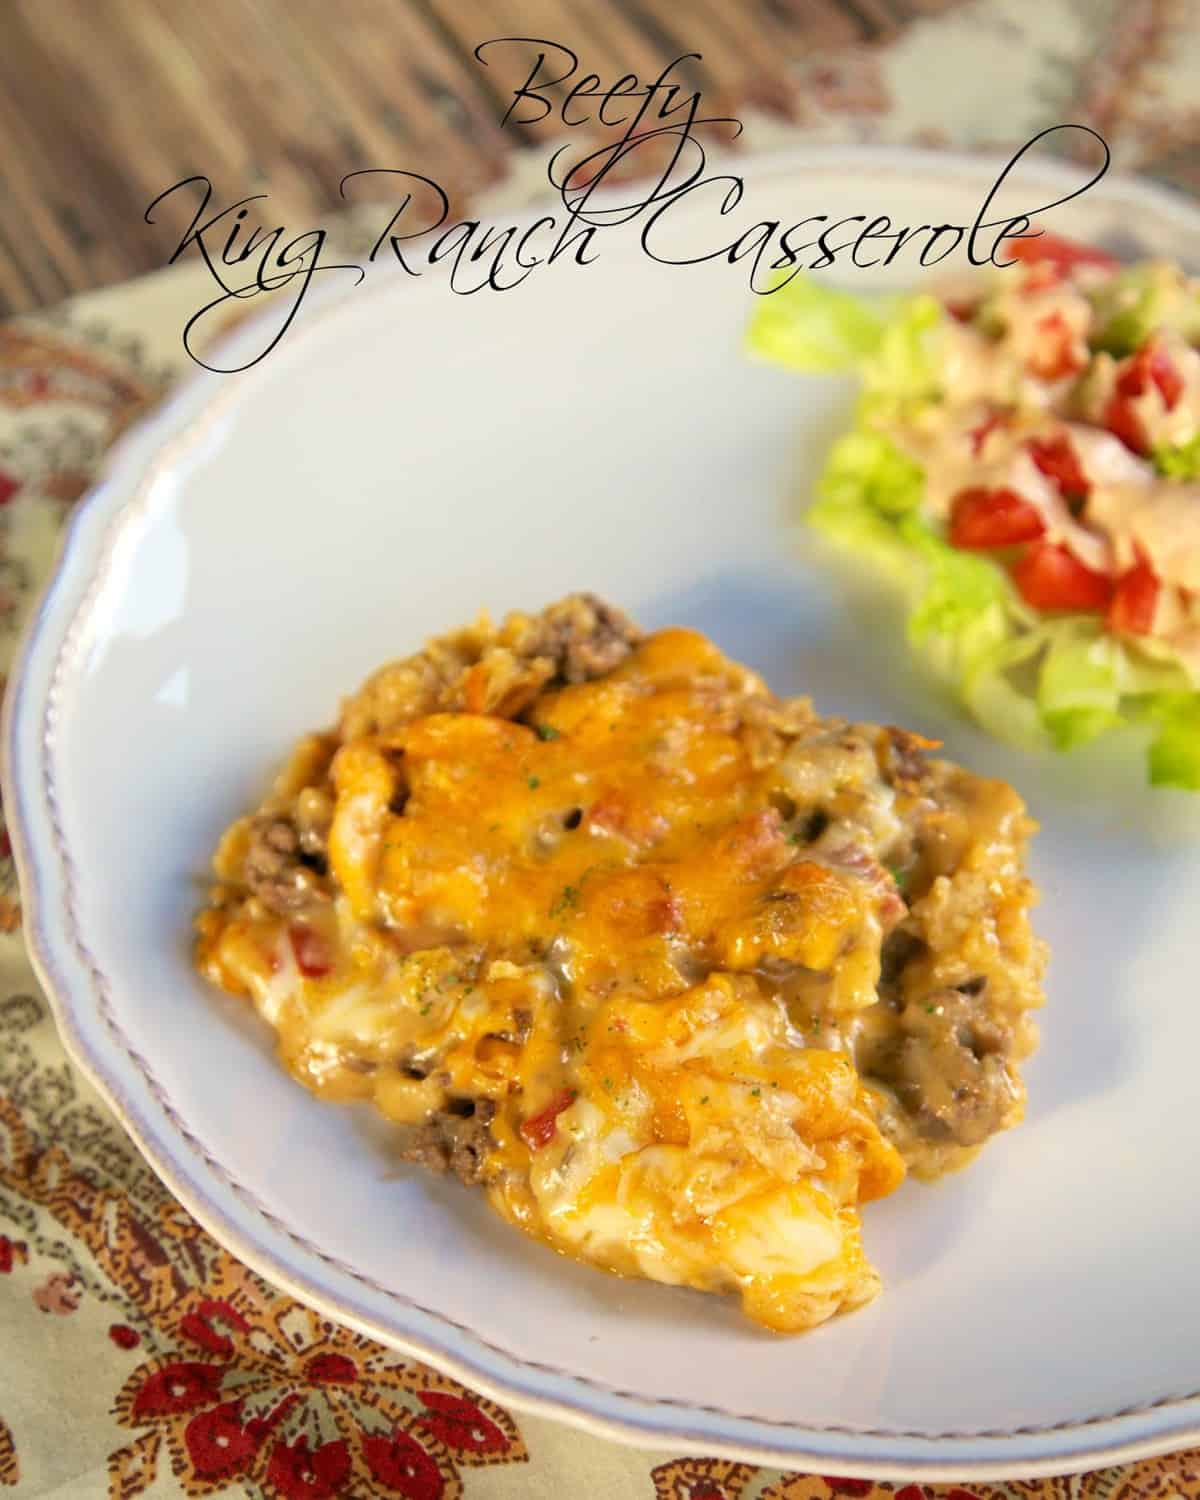 Beefy King Ranch Casserole - tortilla chips, Rotel, meat & cheese = DELICIOUS! The whole family cleaned their plates! Hamburger, taco seasoning, cream of chicken, cream of mushroom, onion, Rotel, Cheez Whiz, hot sauce, worcestershire, tortilla chips, cheddar and mozzarella cheese. Can make ahead of time and refrigerate or freeze. Ready in about 30 minutes. SO delicious!